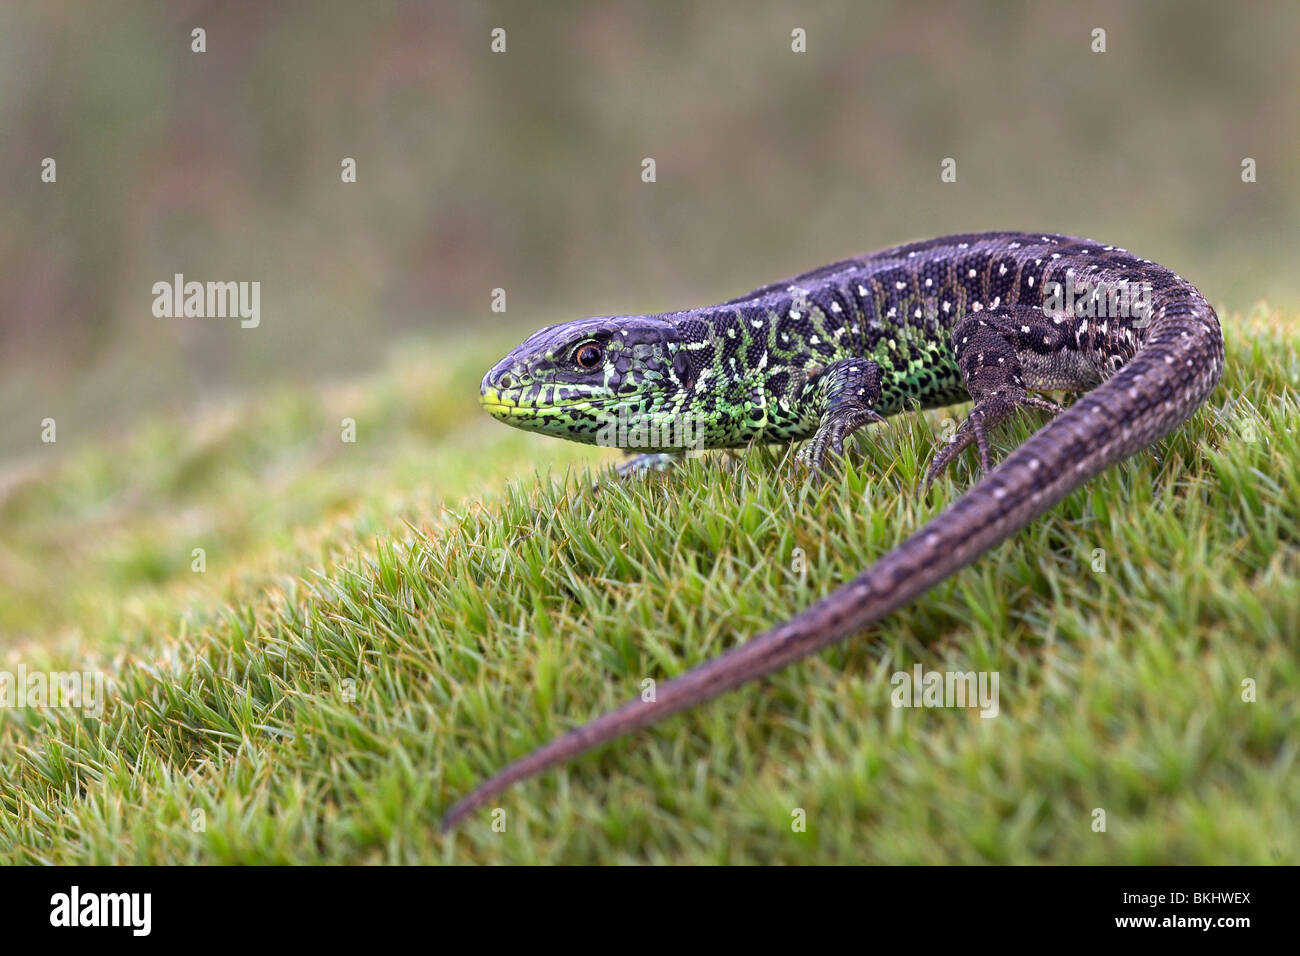 Male Sand lizard on mos photographed in whole. Stock Photo